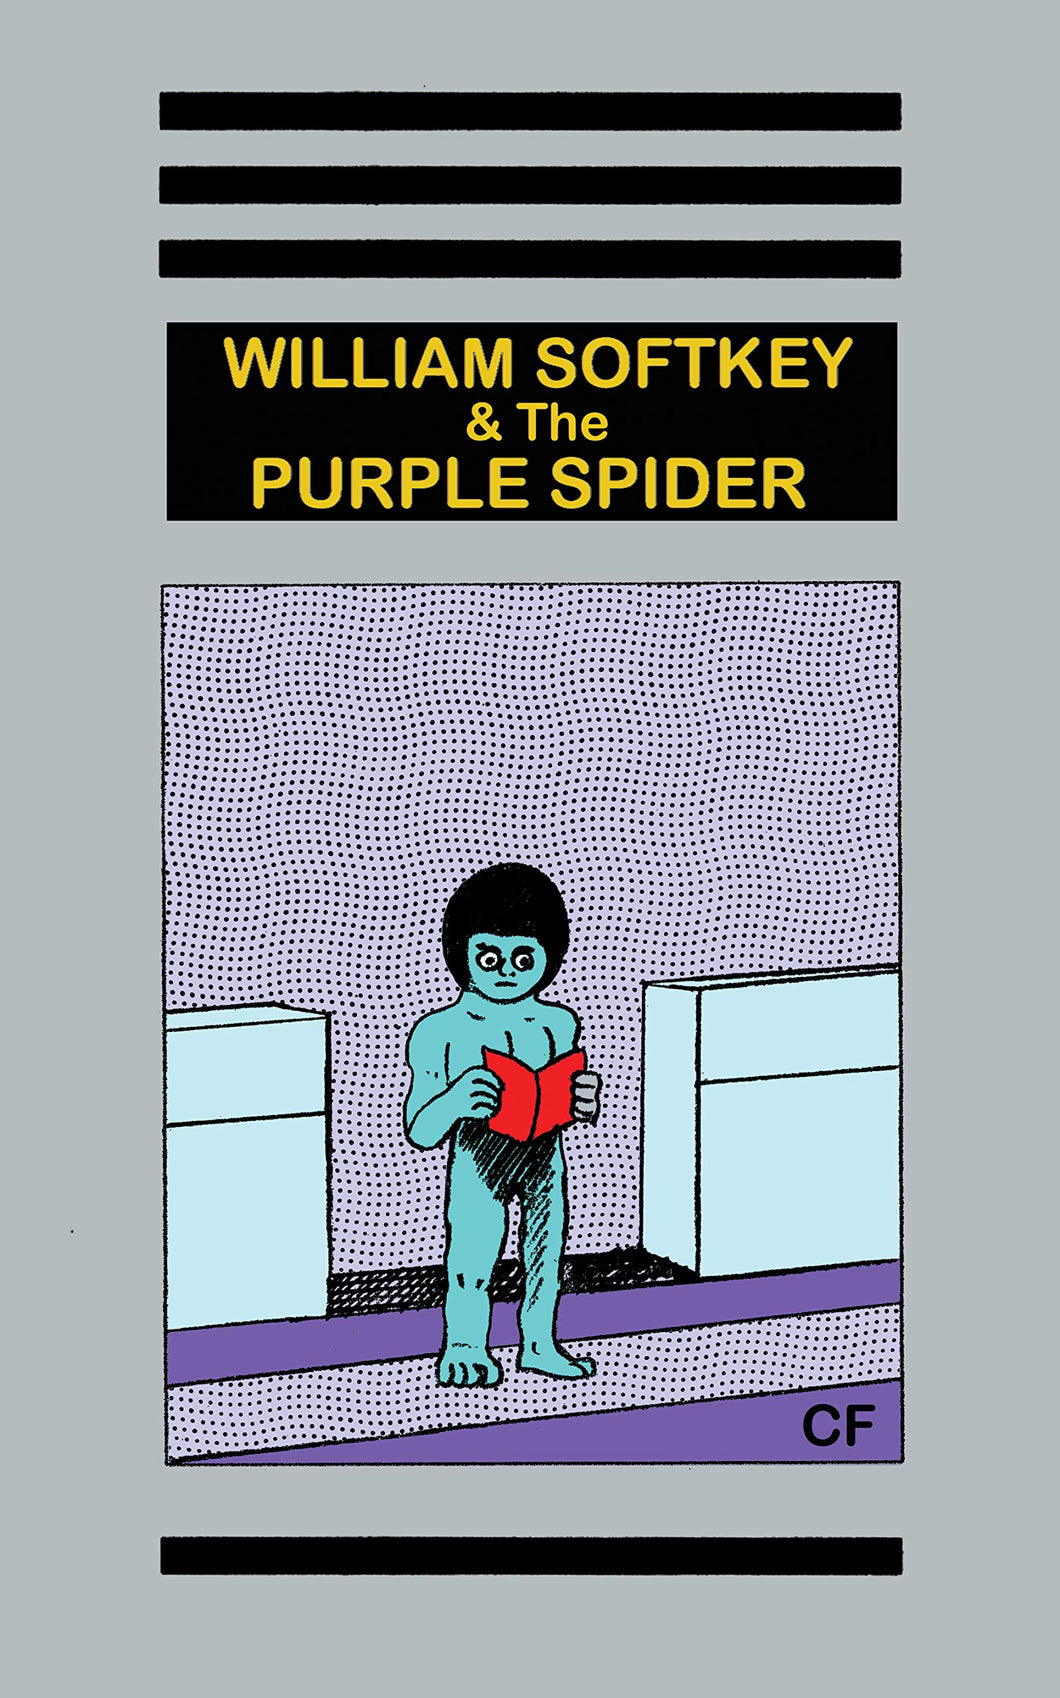 William Softkey and the Purple Spider by Christopher Forgues (C.F.)